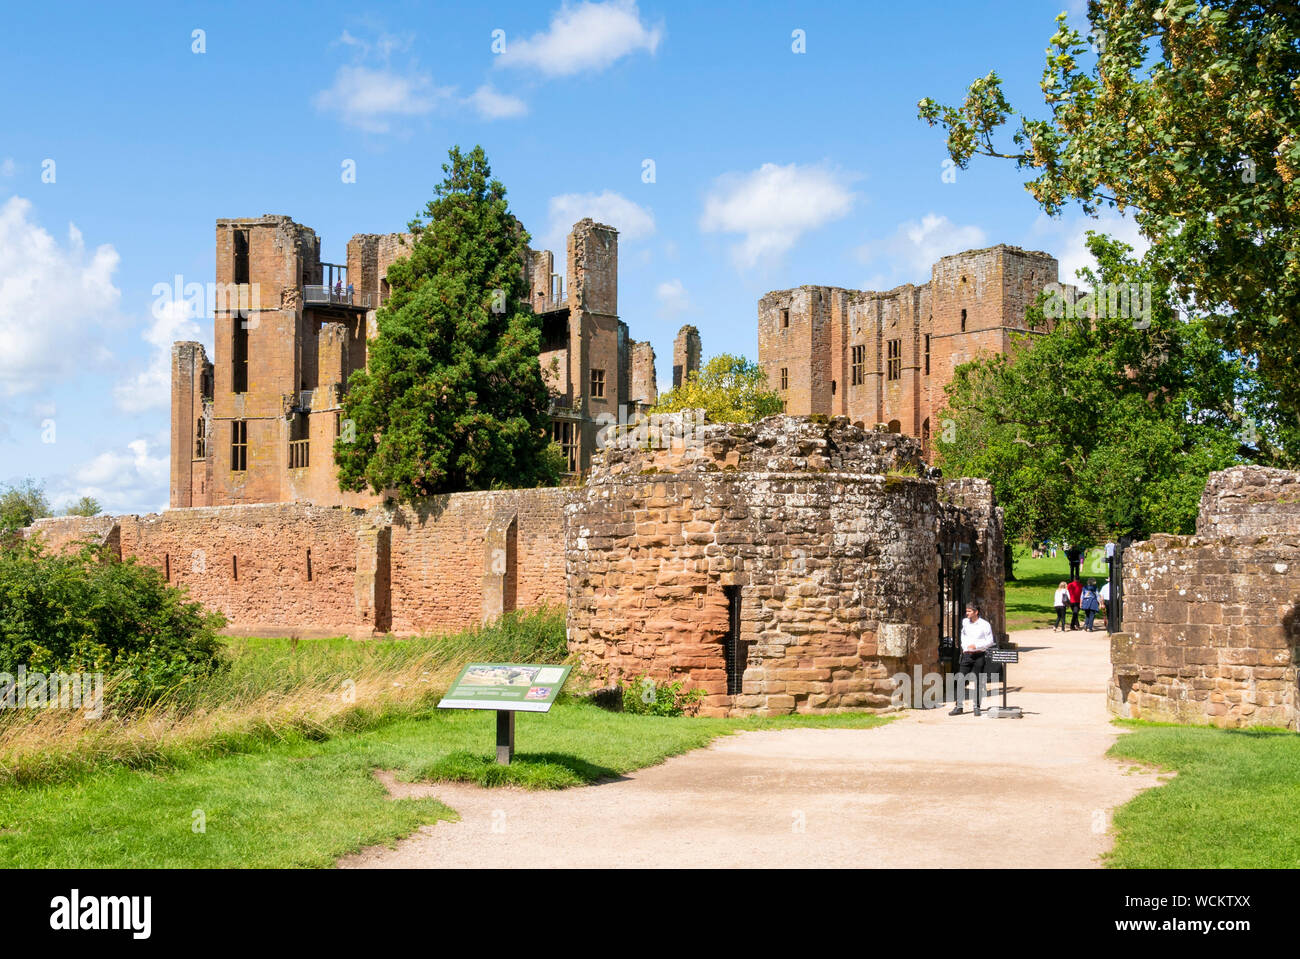 Kenilworth Castle - Entrance gate to Kenilworth Castle ruins and grounds Kenilworth Warwickshire England uk gb Europe Stock Photo